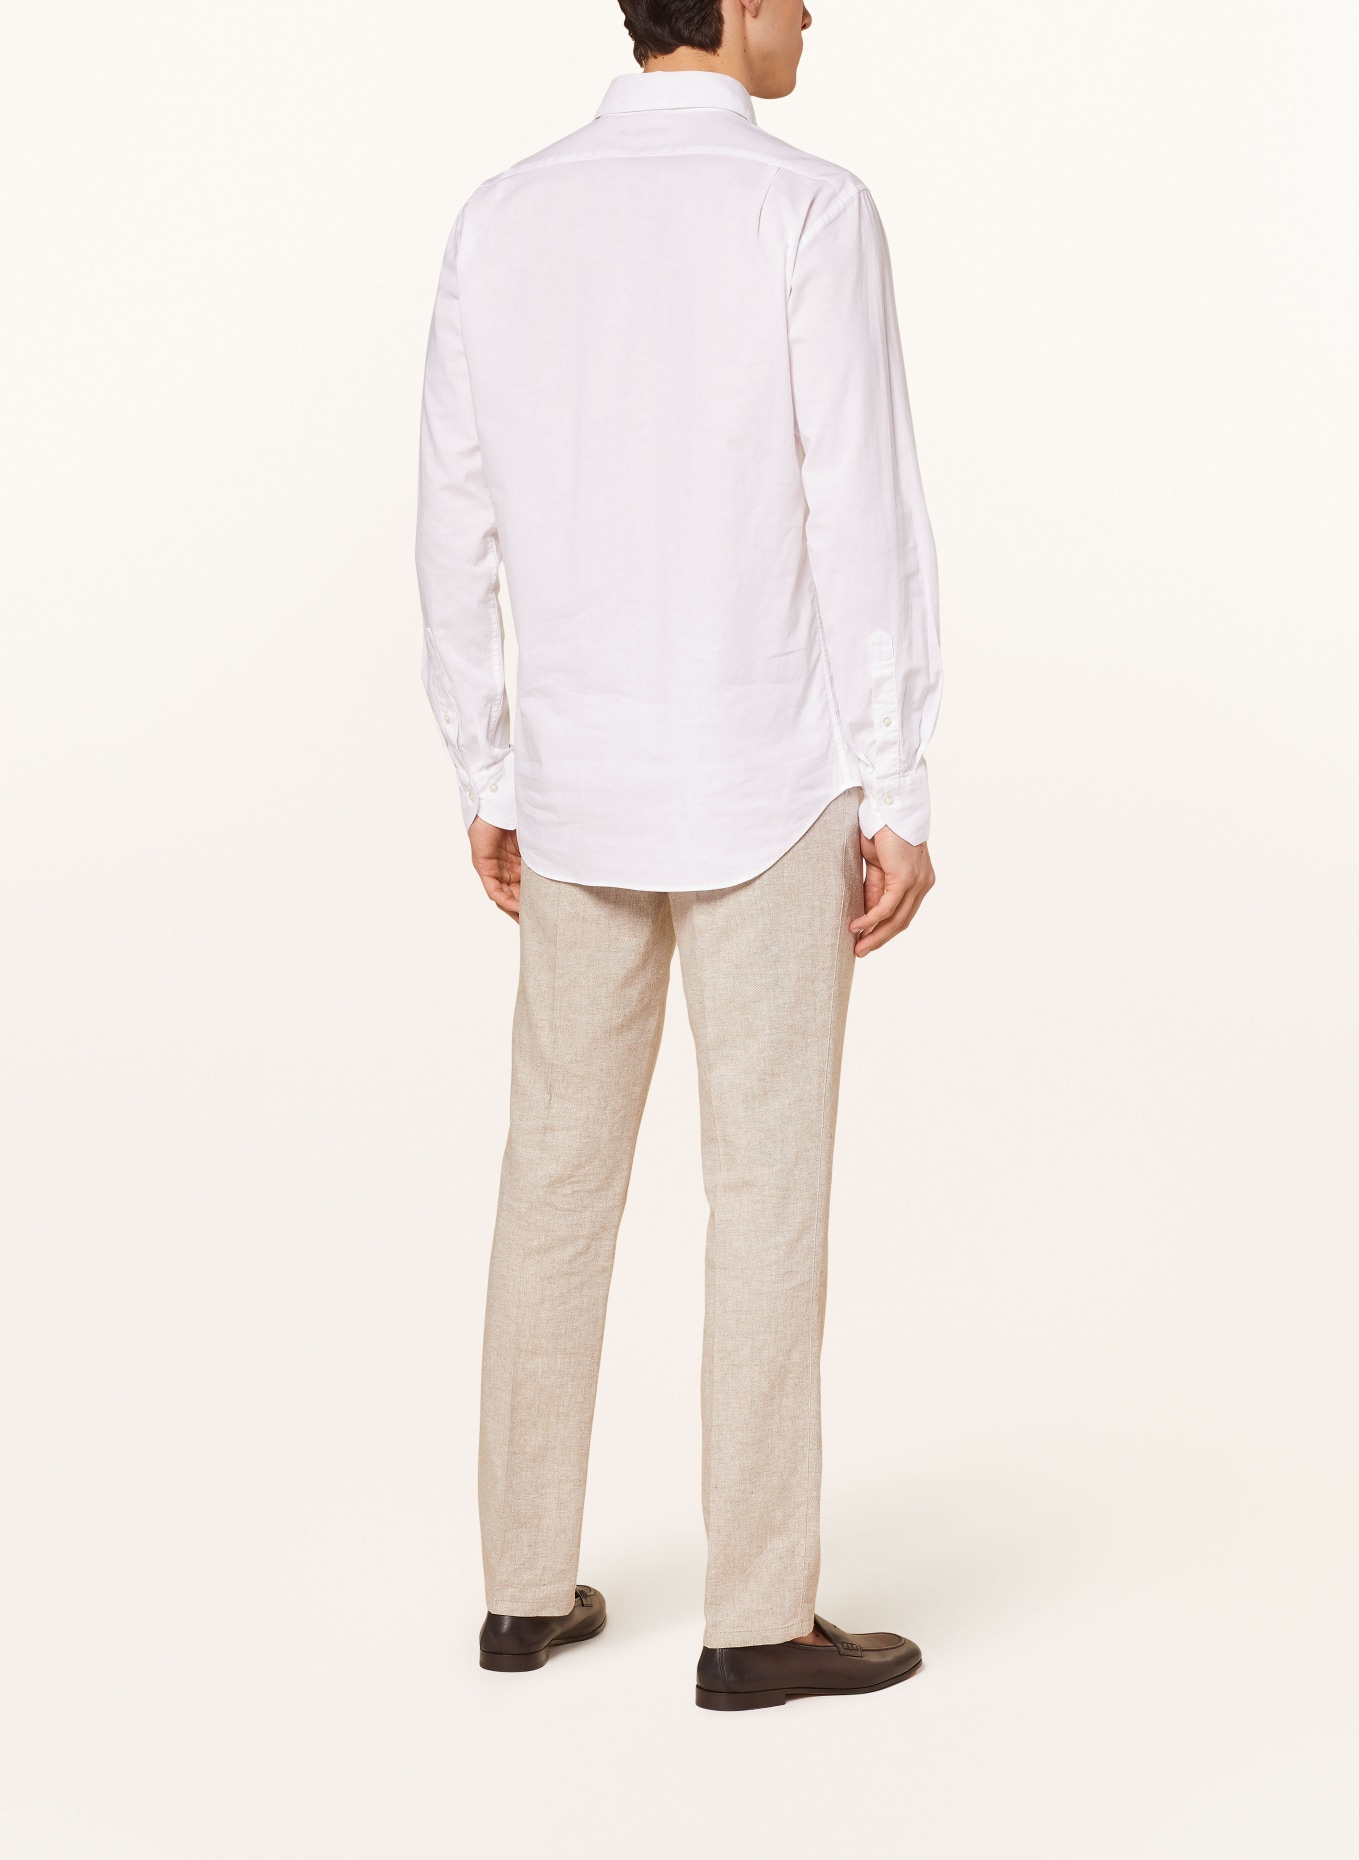 STROKESMAN'S Shirt regular fit with linen, Color: WHITE (Image 3)